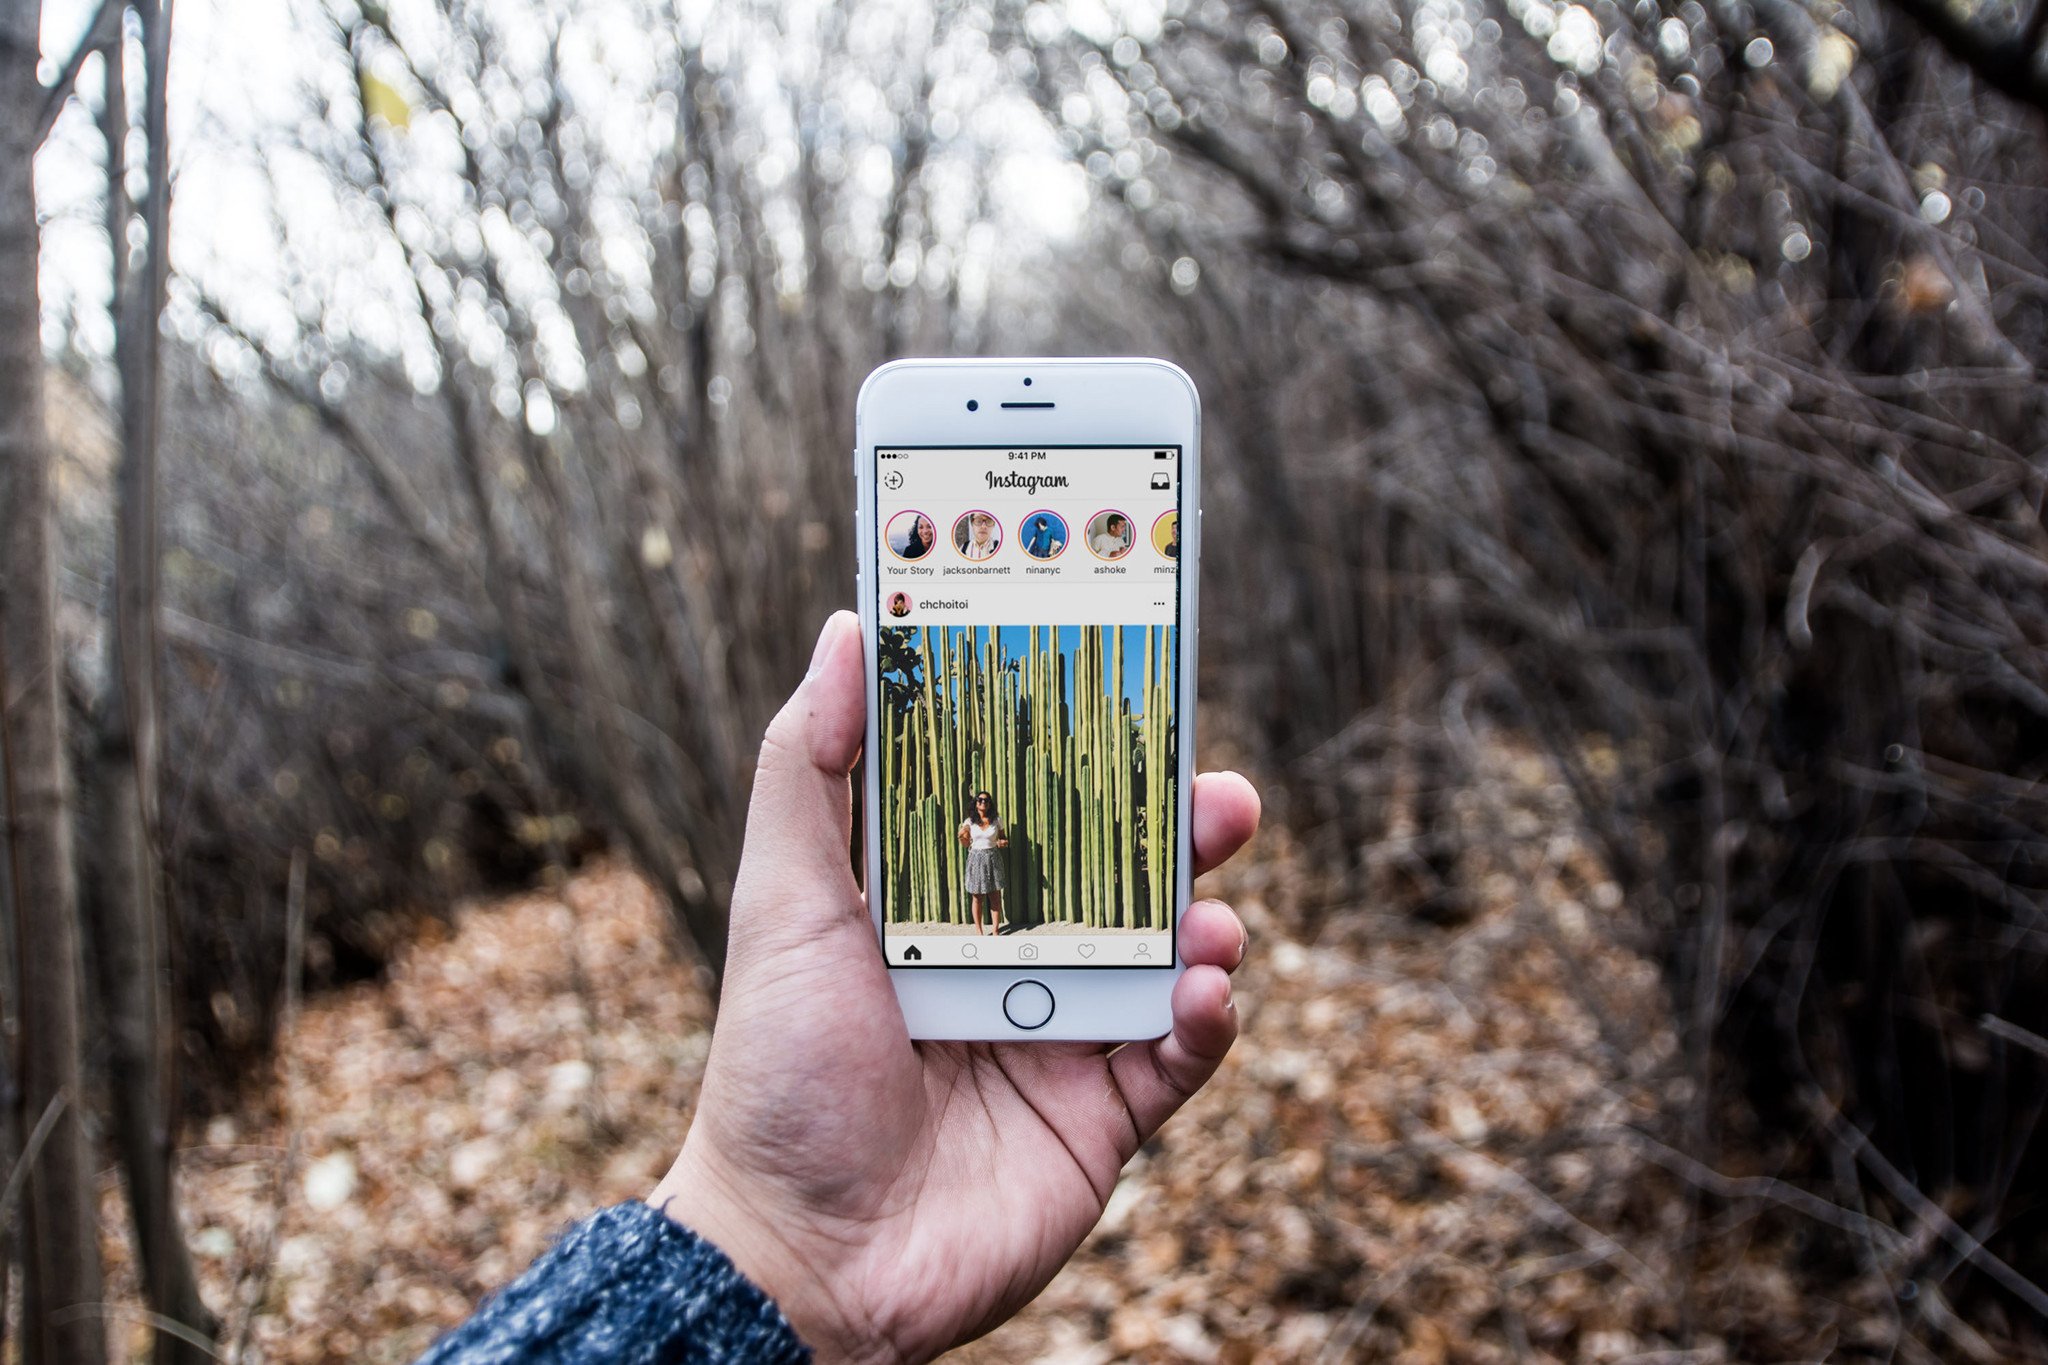 A hand holds an iPhone in a wooded area with the Instagram app open on the screen